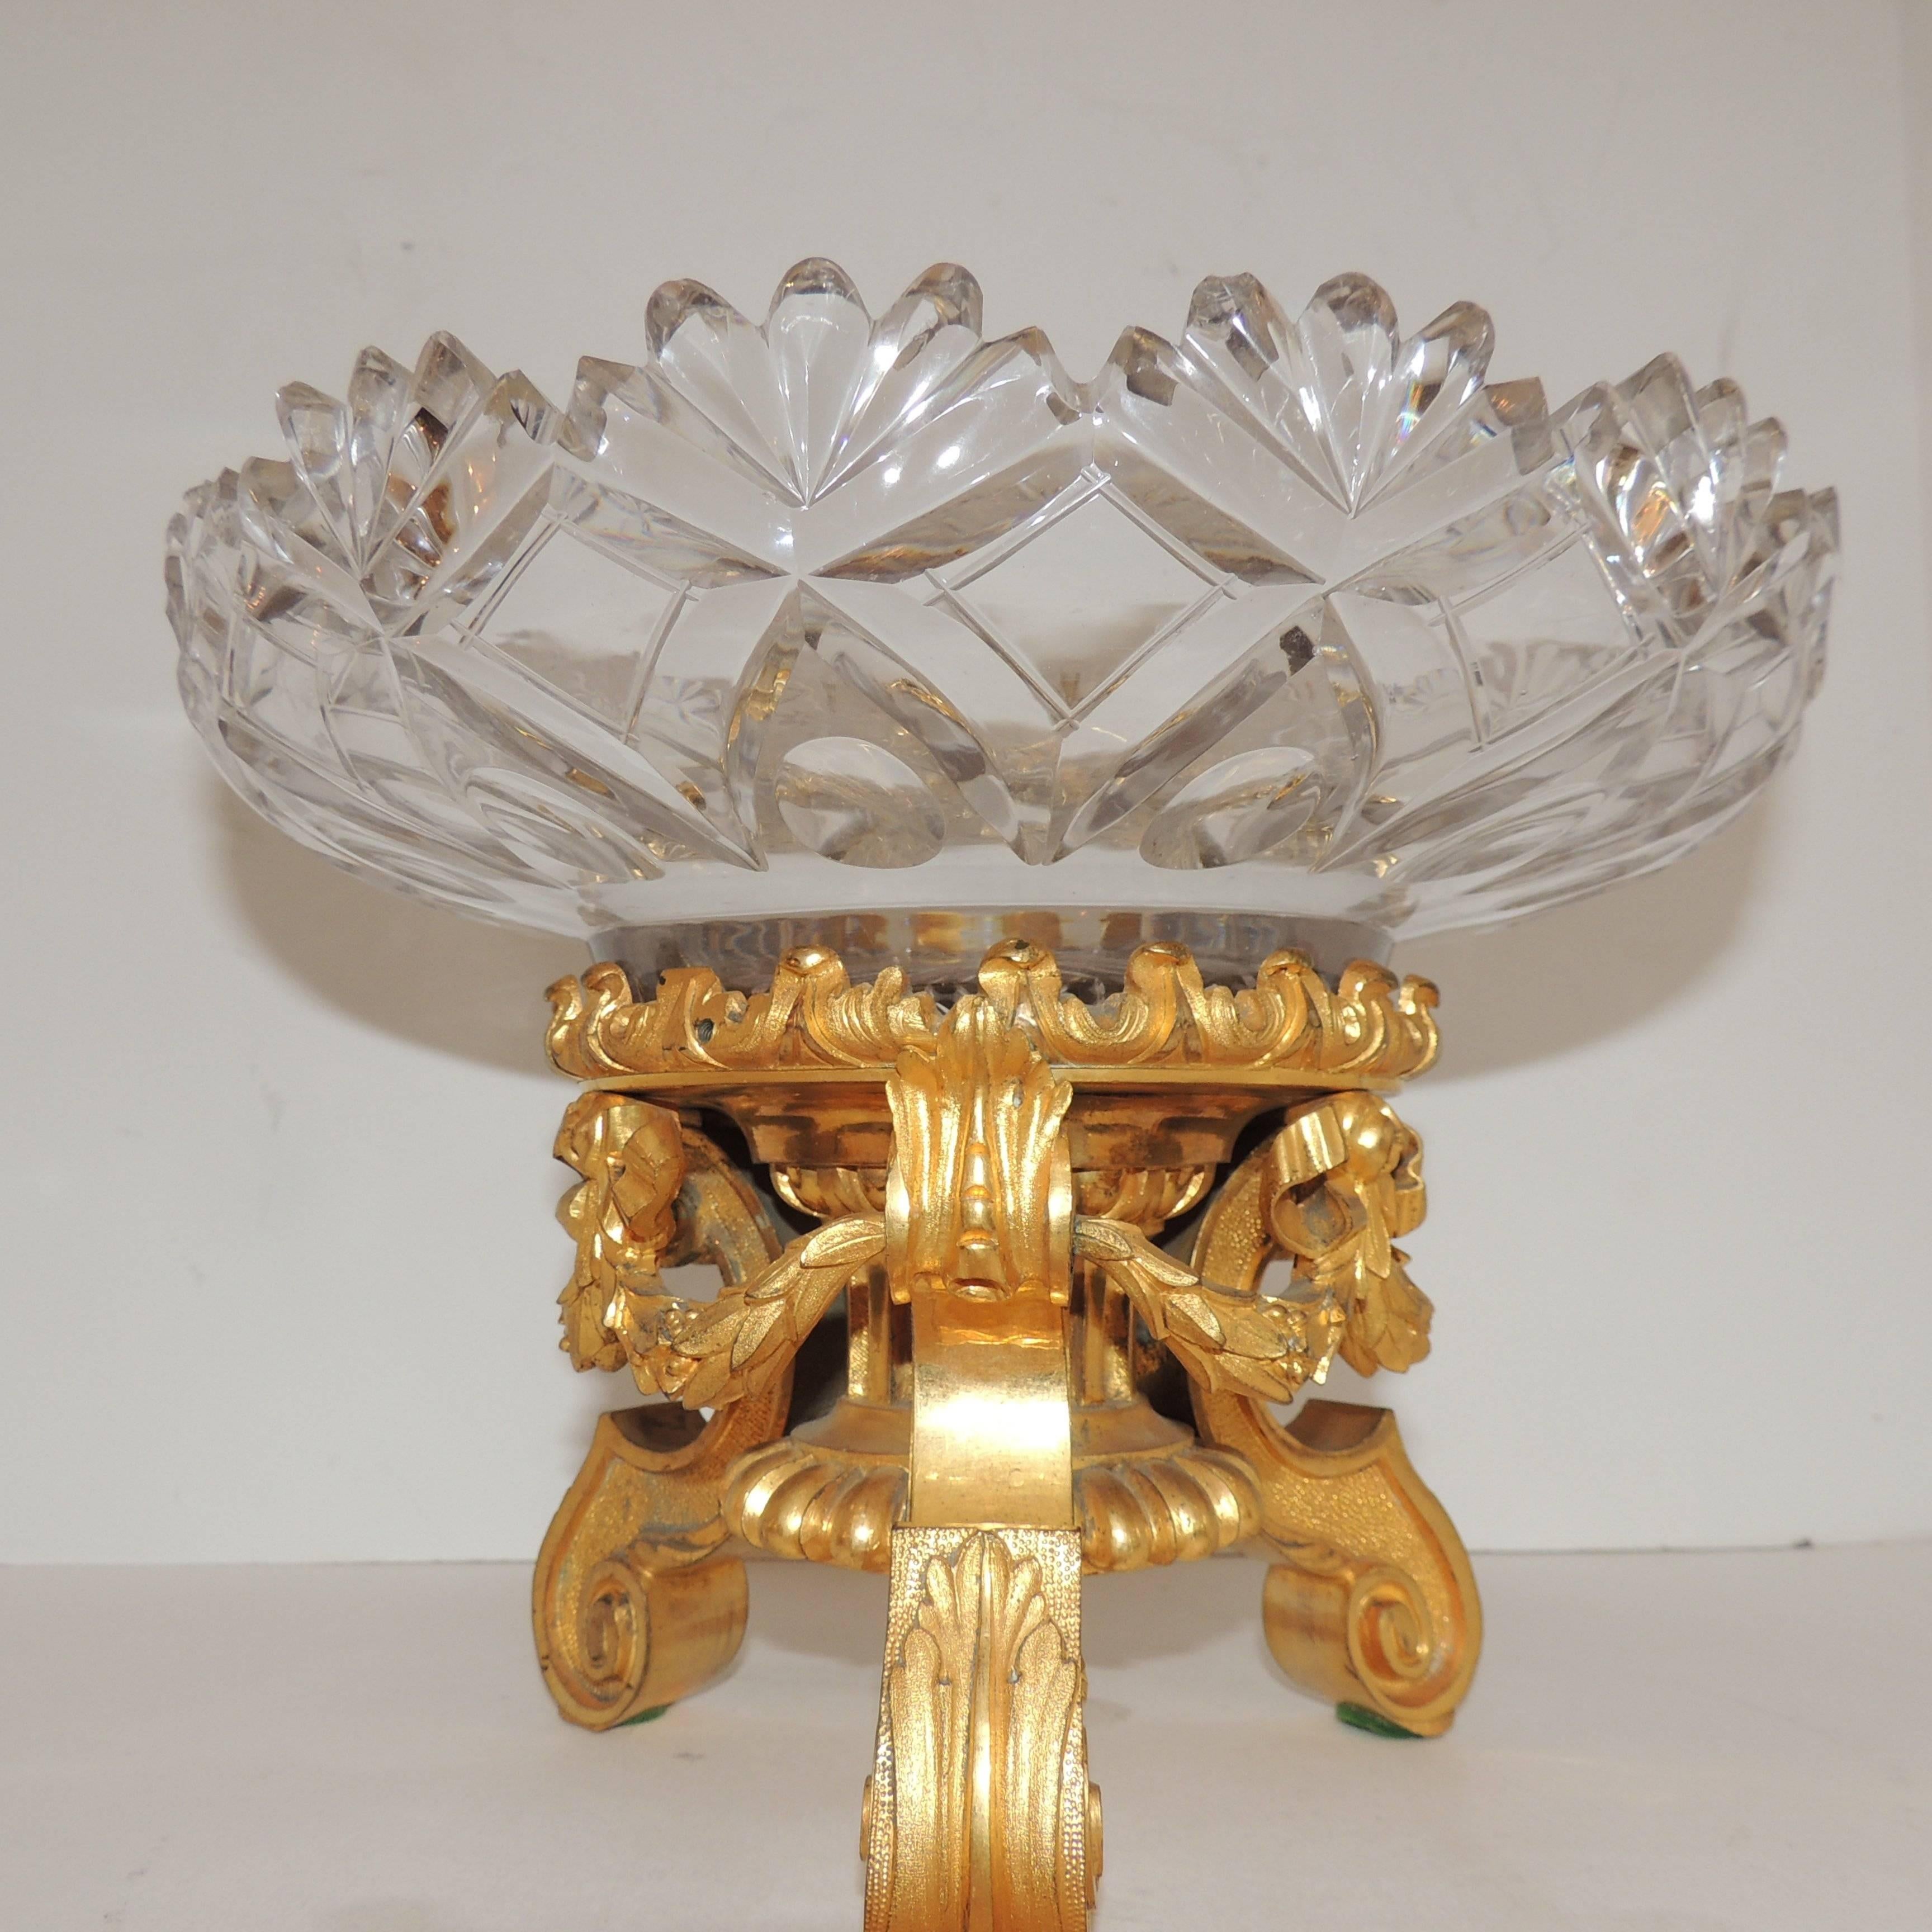 Early 20th Century Wonderful French Dore Bronze & Cut Crystal Round Centerpiece Gilt Bows and Swags